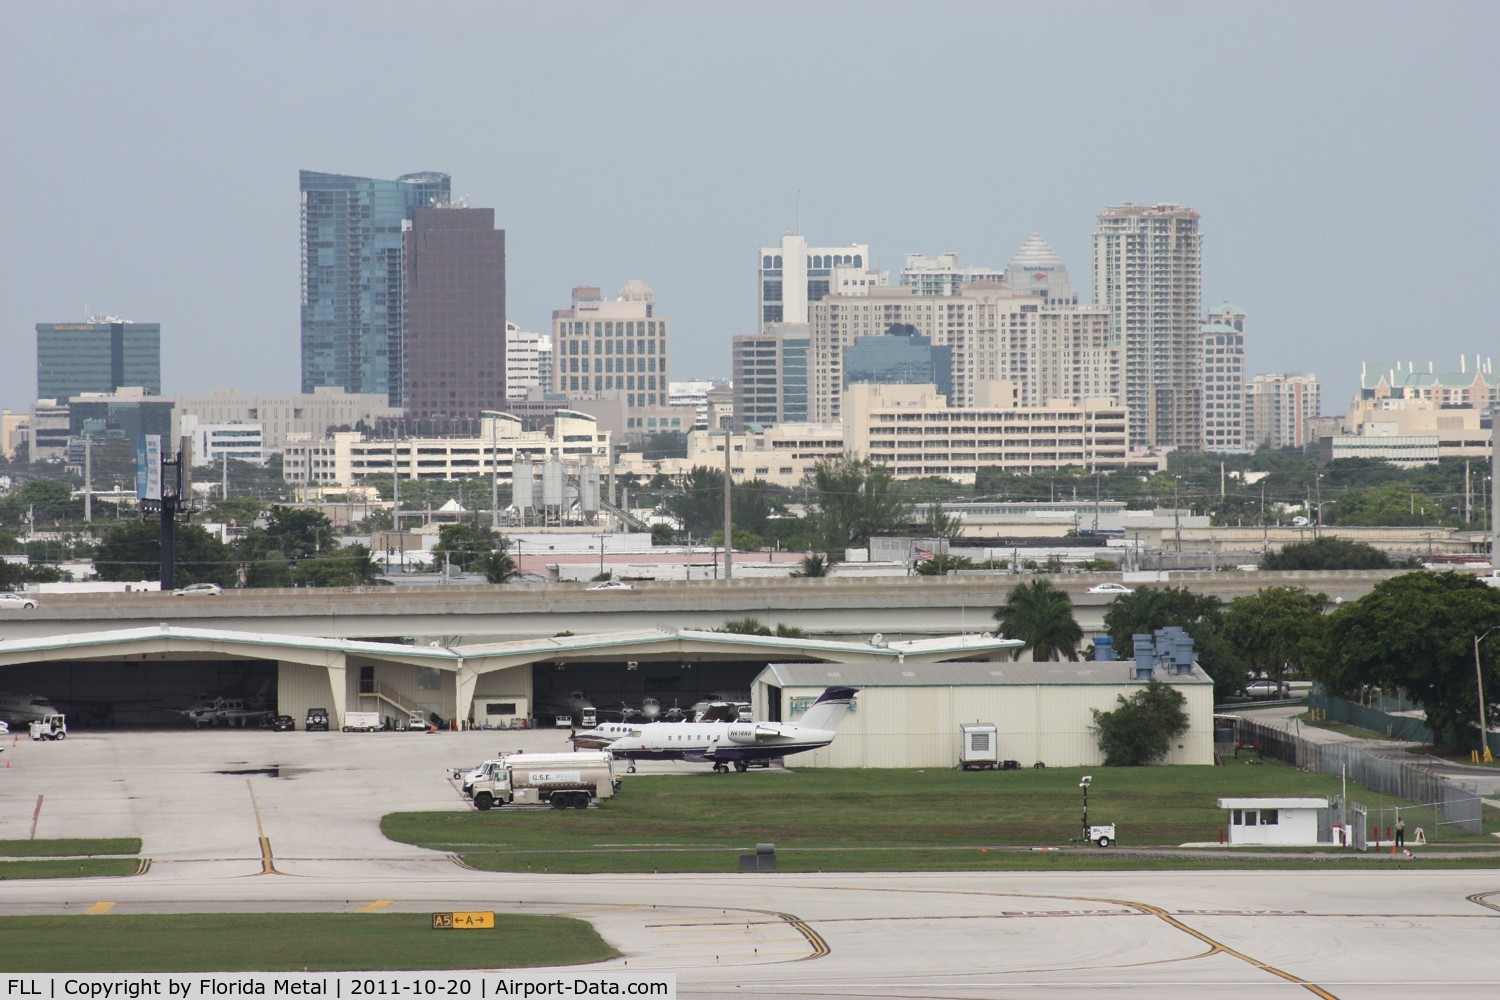 Fort Lauderdale/hollywood International Airport (FLL) - Downtown Ft Lauderdale in the distance